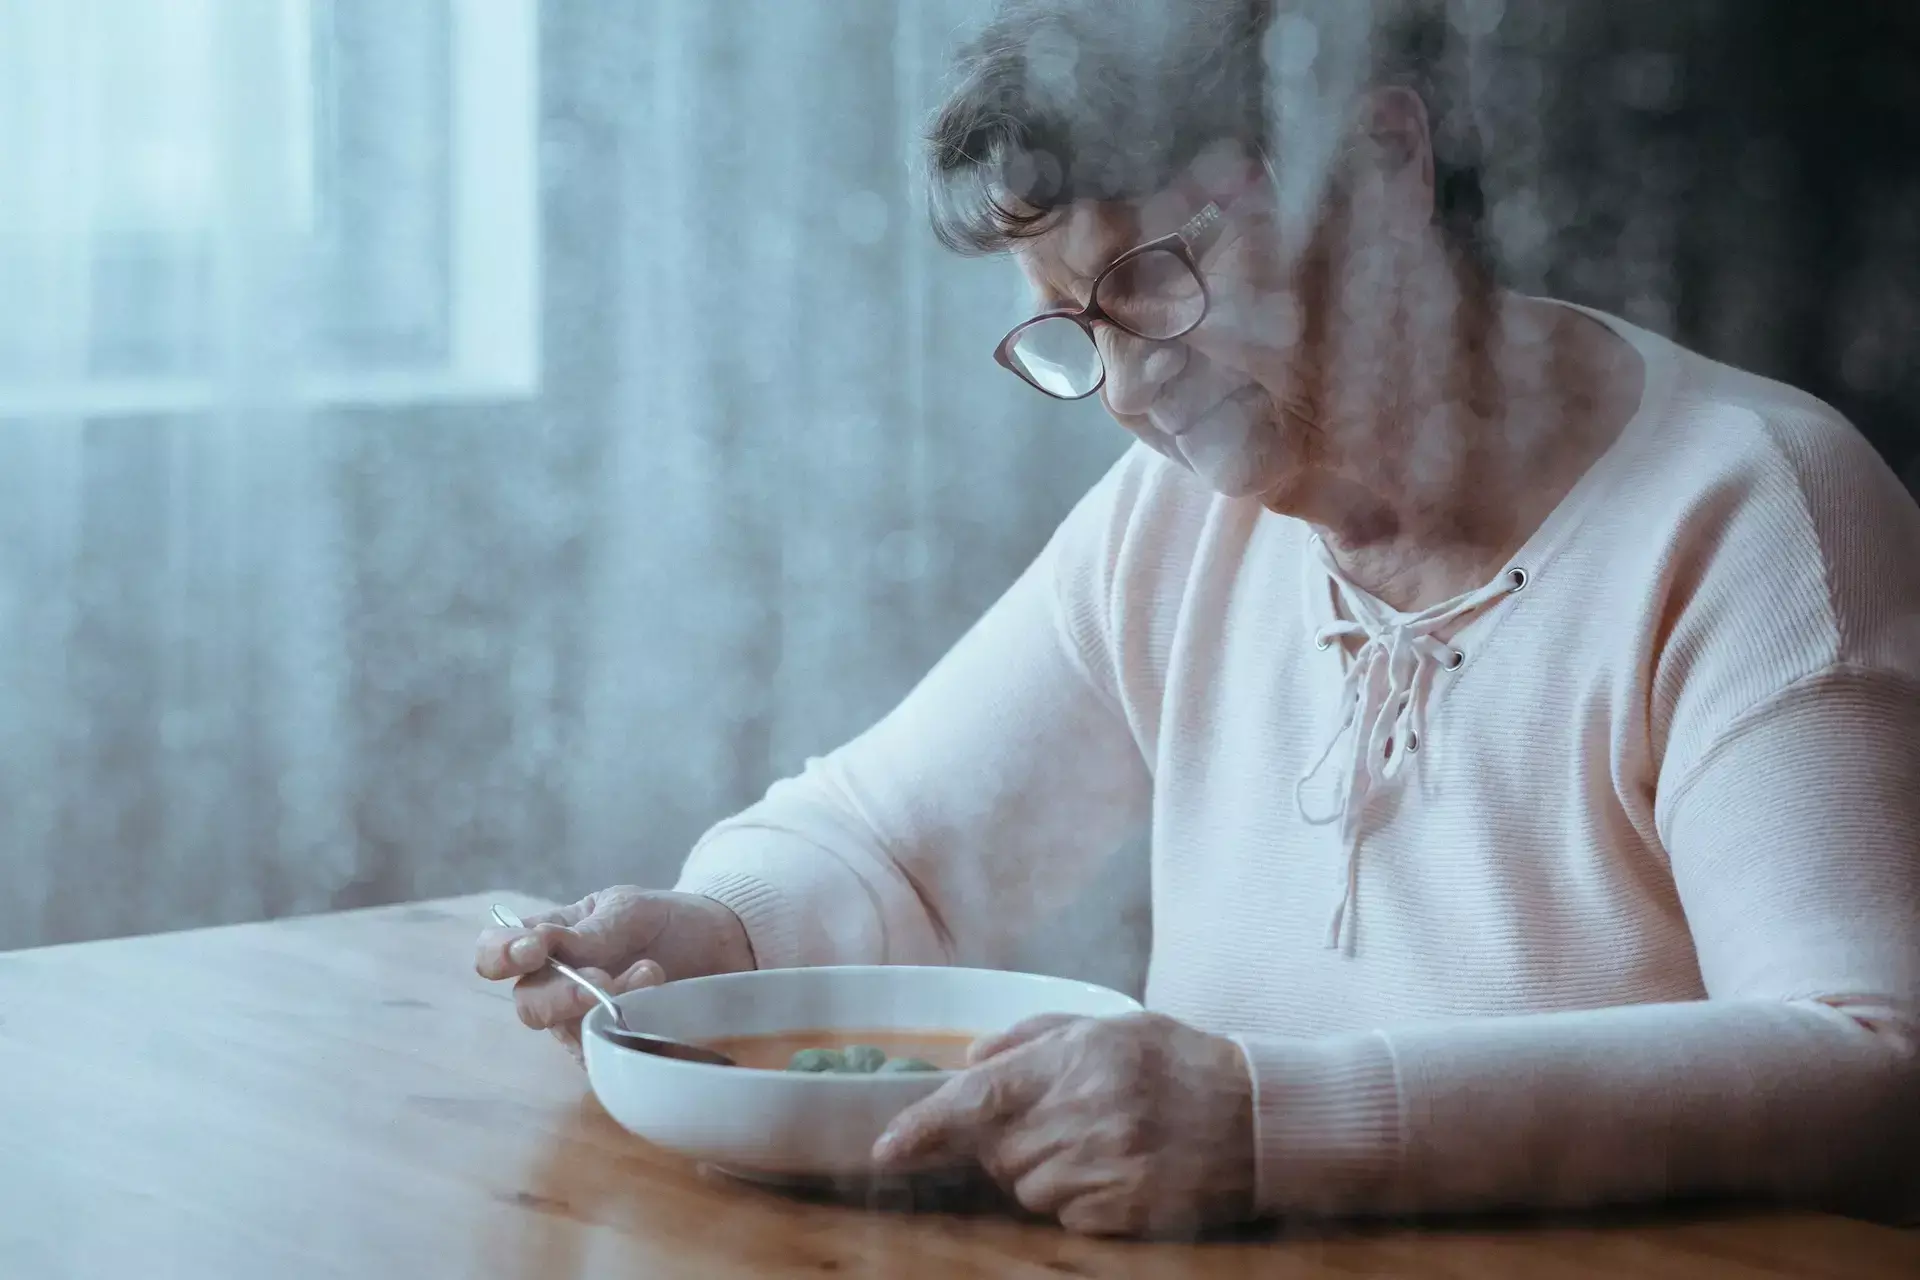 Food security significantly linked to  severe hypoglycemia among elderly  diabetes patients, finds study